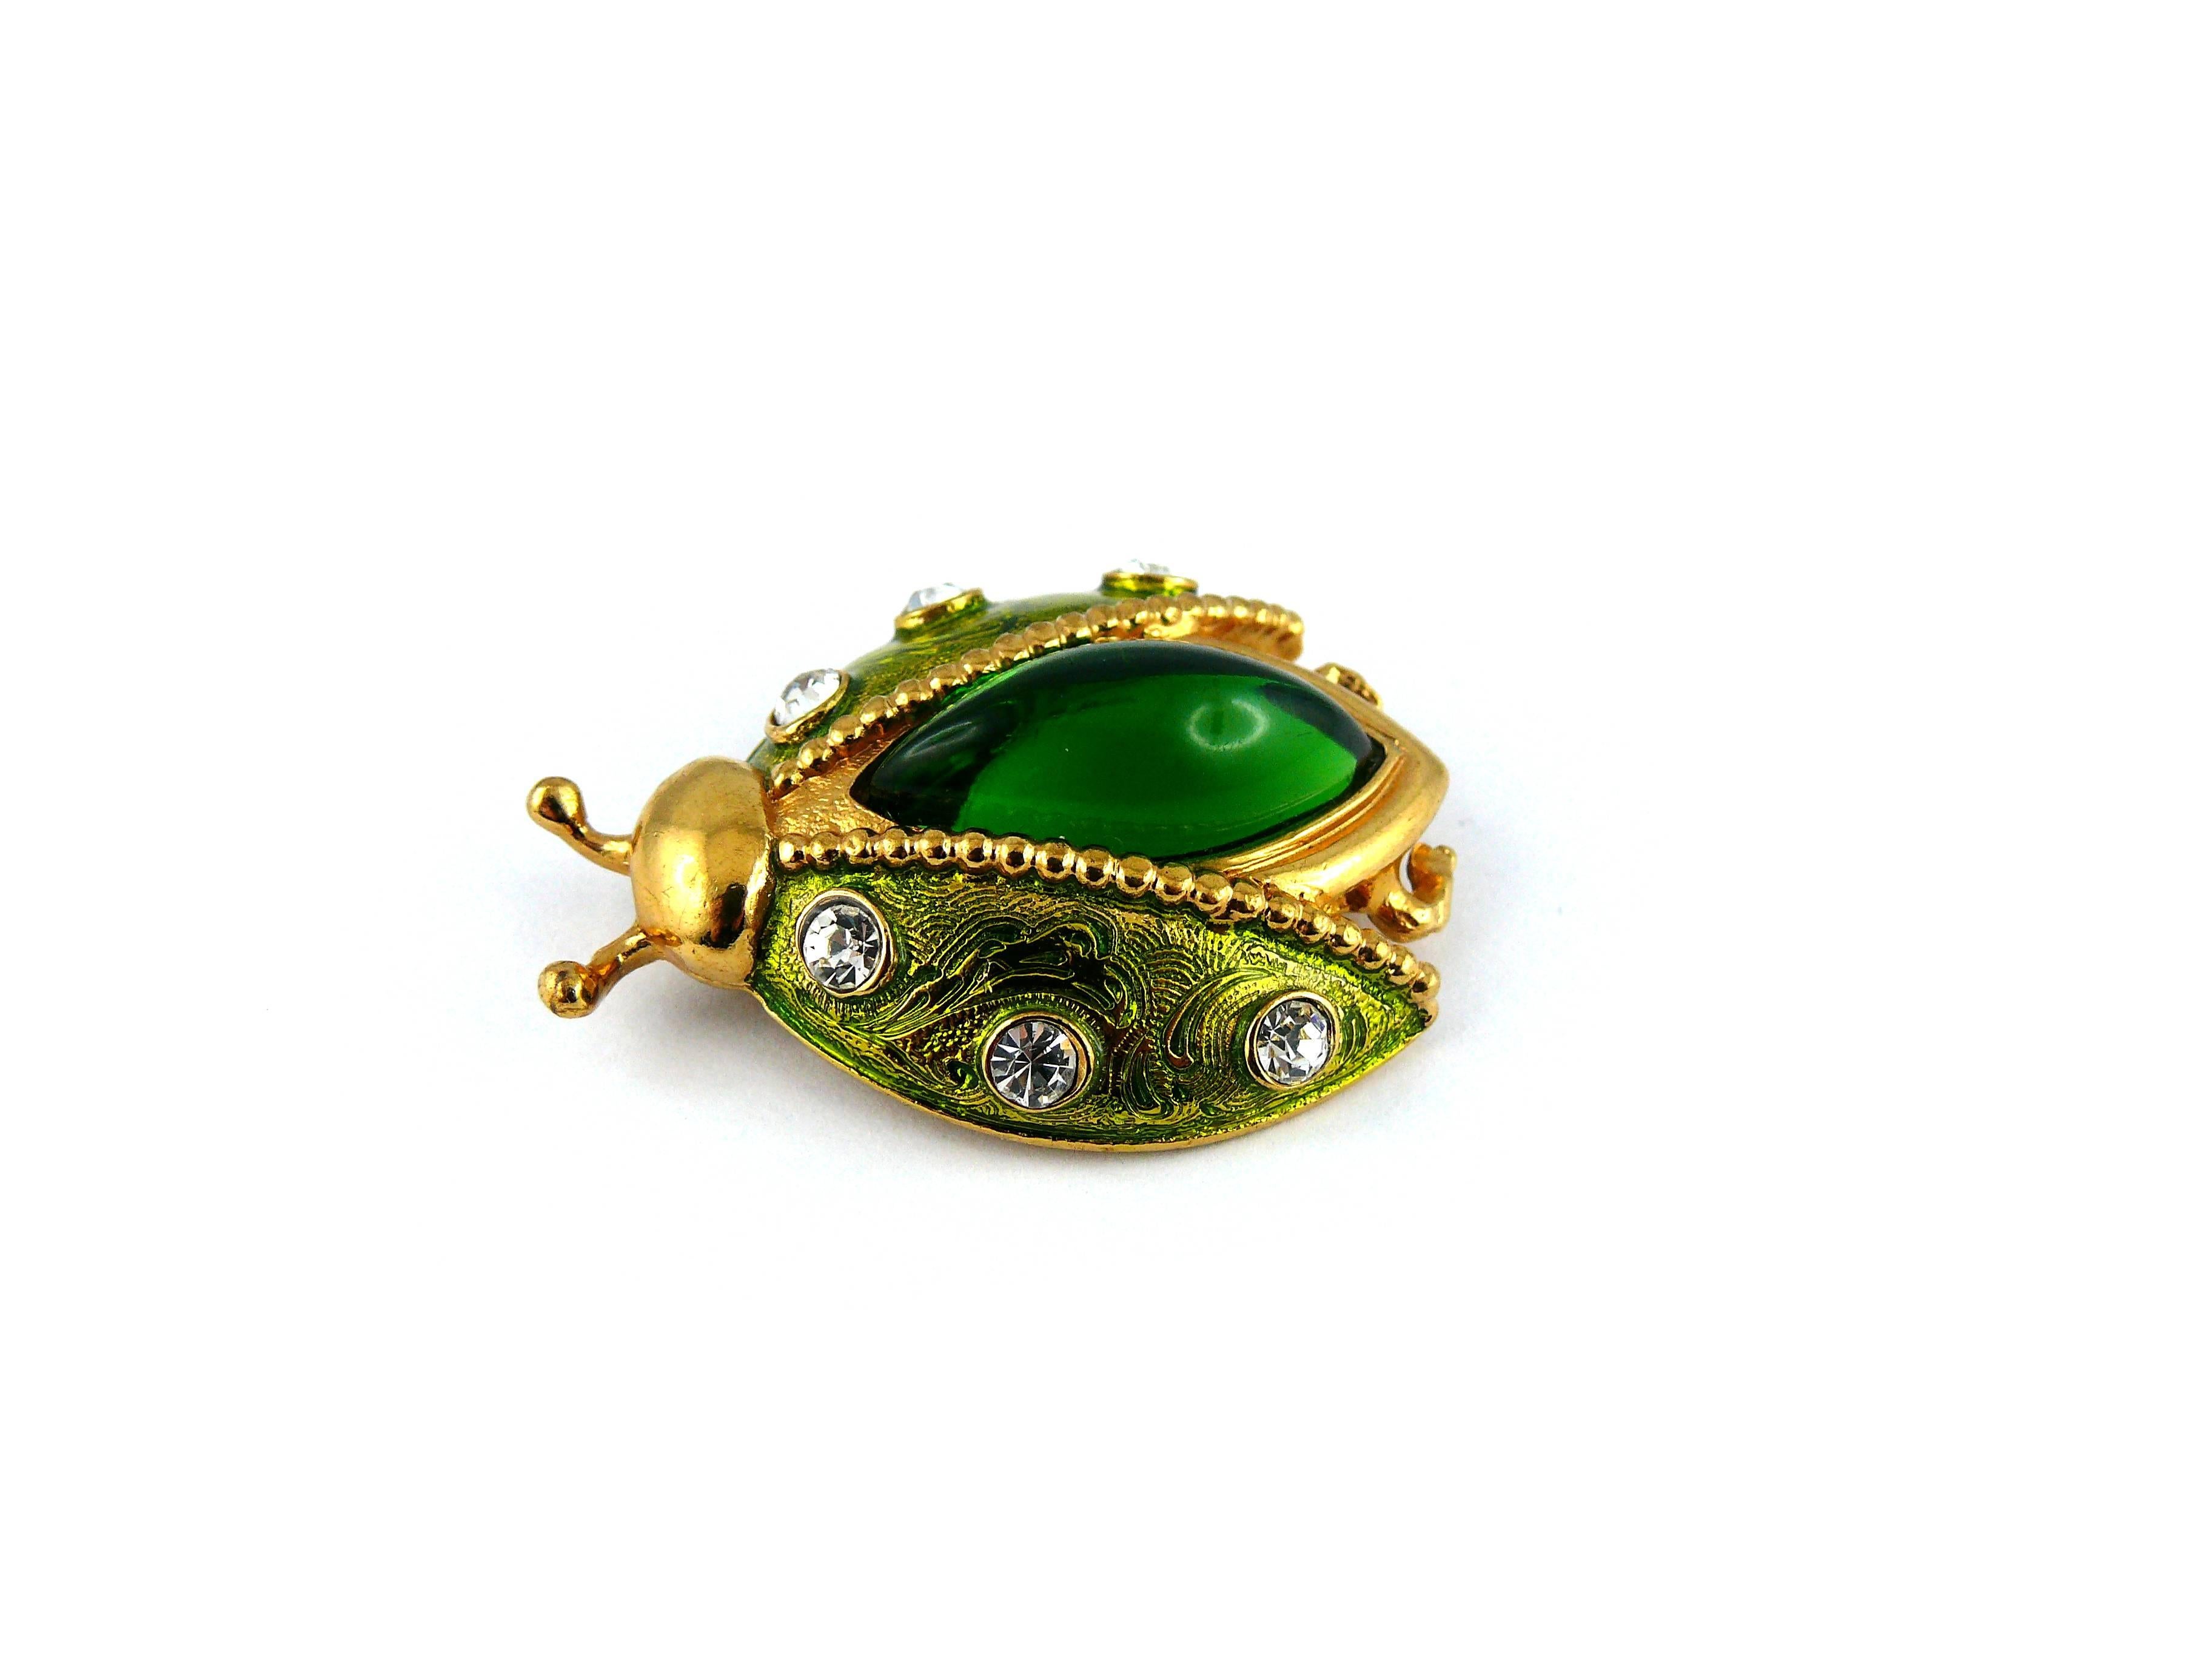 CHRISTIAN DIOR vintage rare jeweled ladybug brooch.

Enameled gold tone metal, embellished with white rhinestones and a green resin domed almond cabochon.

Marked PARFUMS CHRISTIAN DIOR.

JEWELRY CONDITION CHART
- New or never worn : item is in